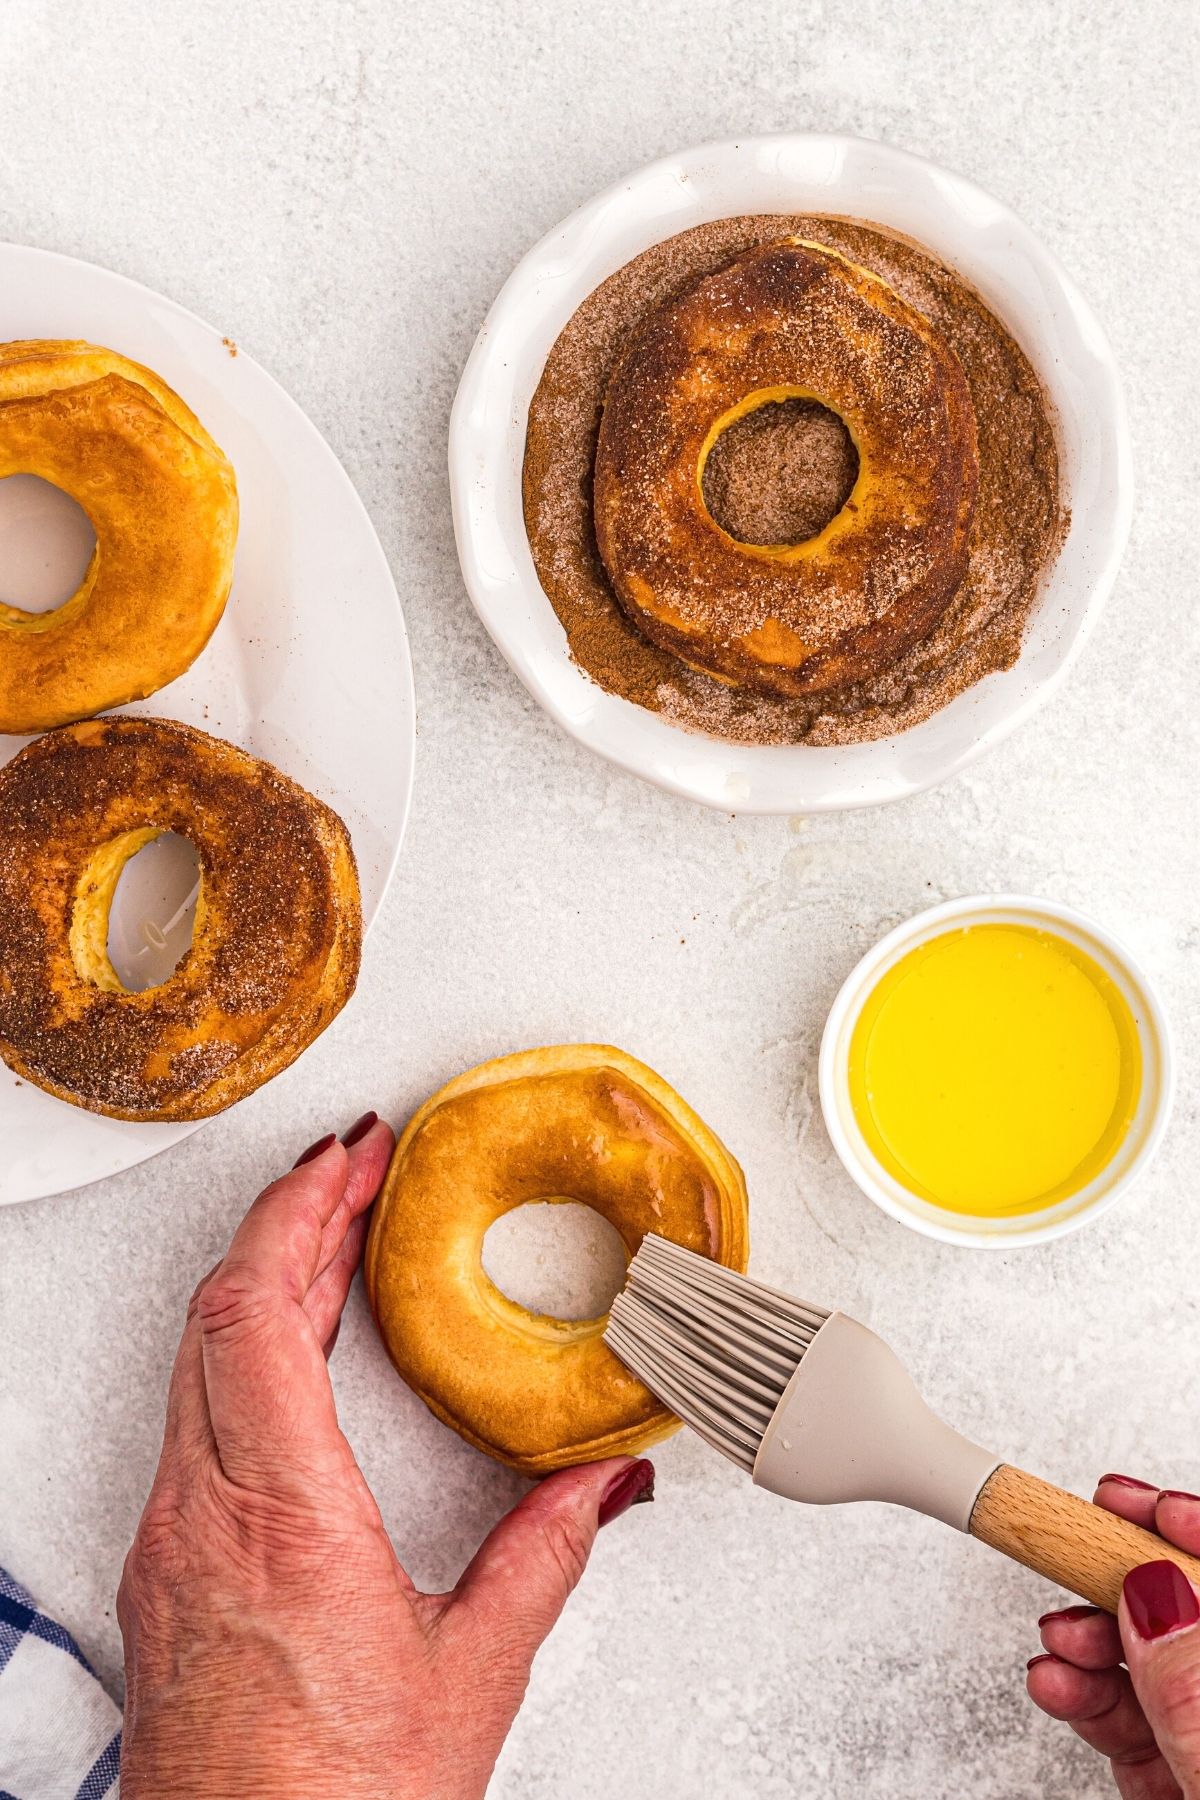 brushing donuts with melted butter before dipping into cinnamon and sugar coating